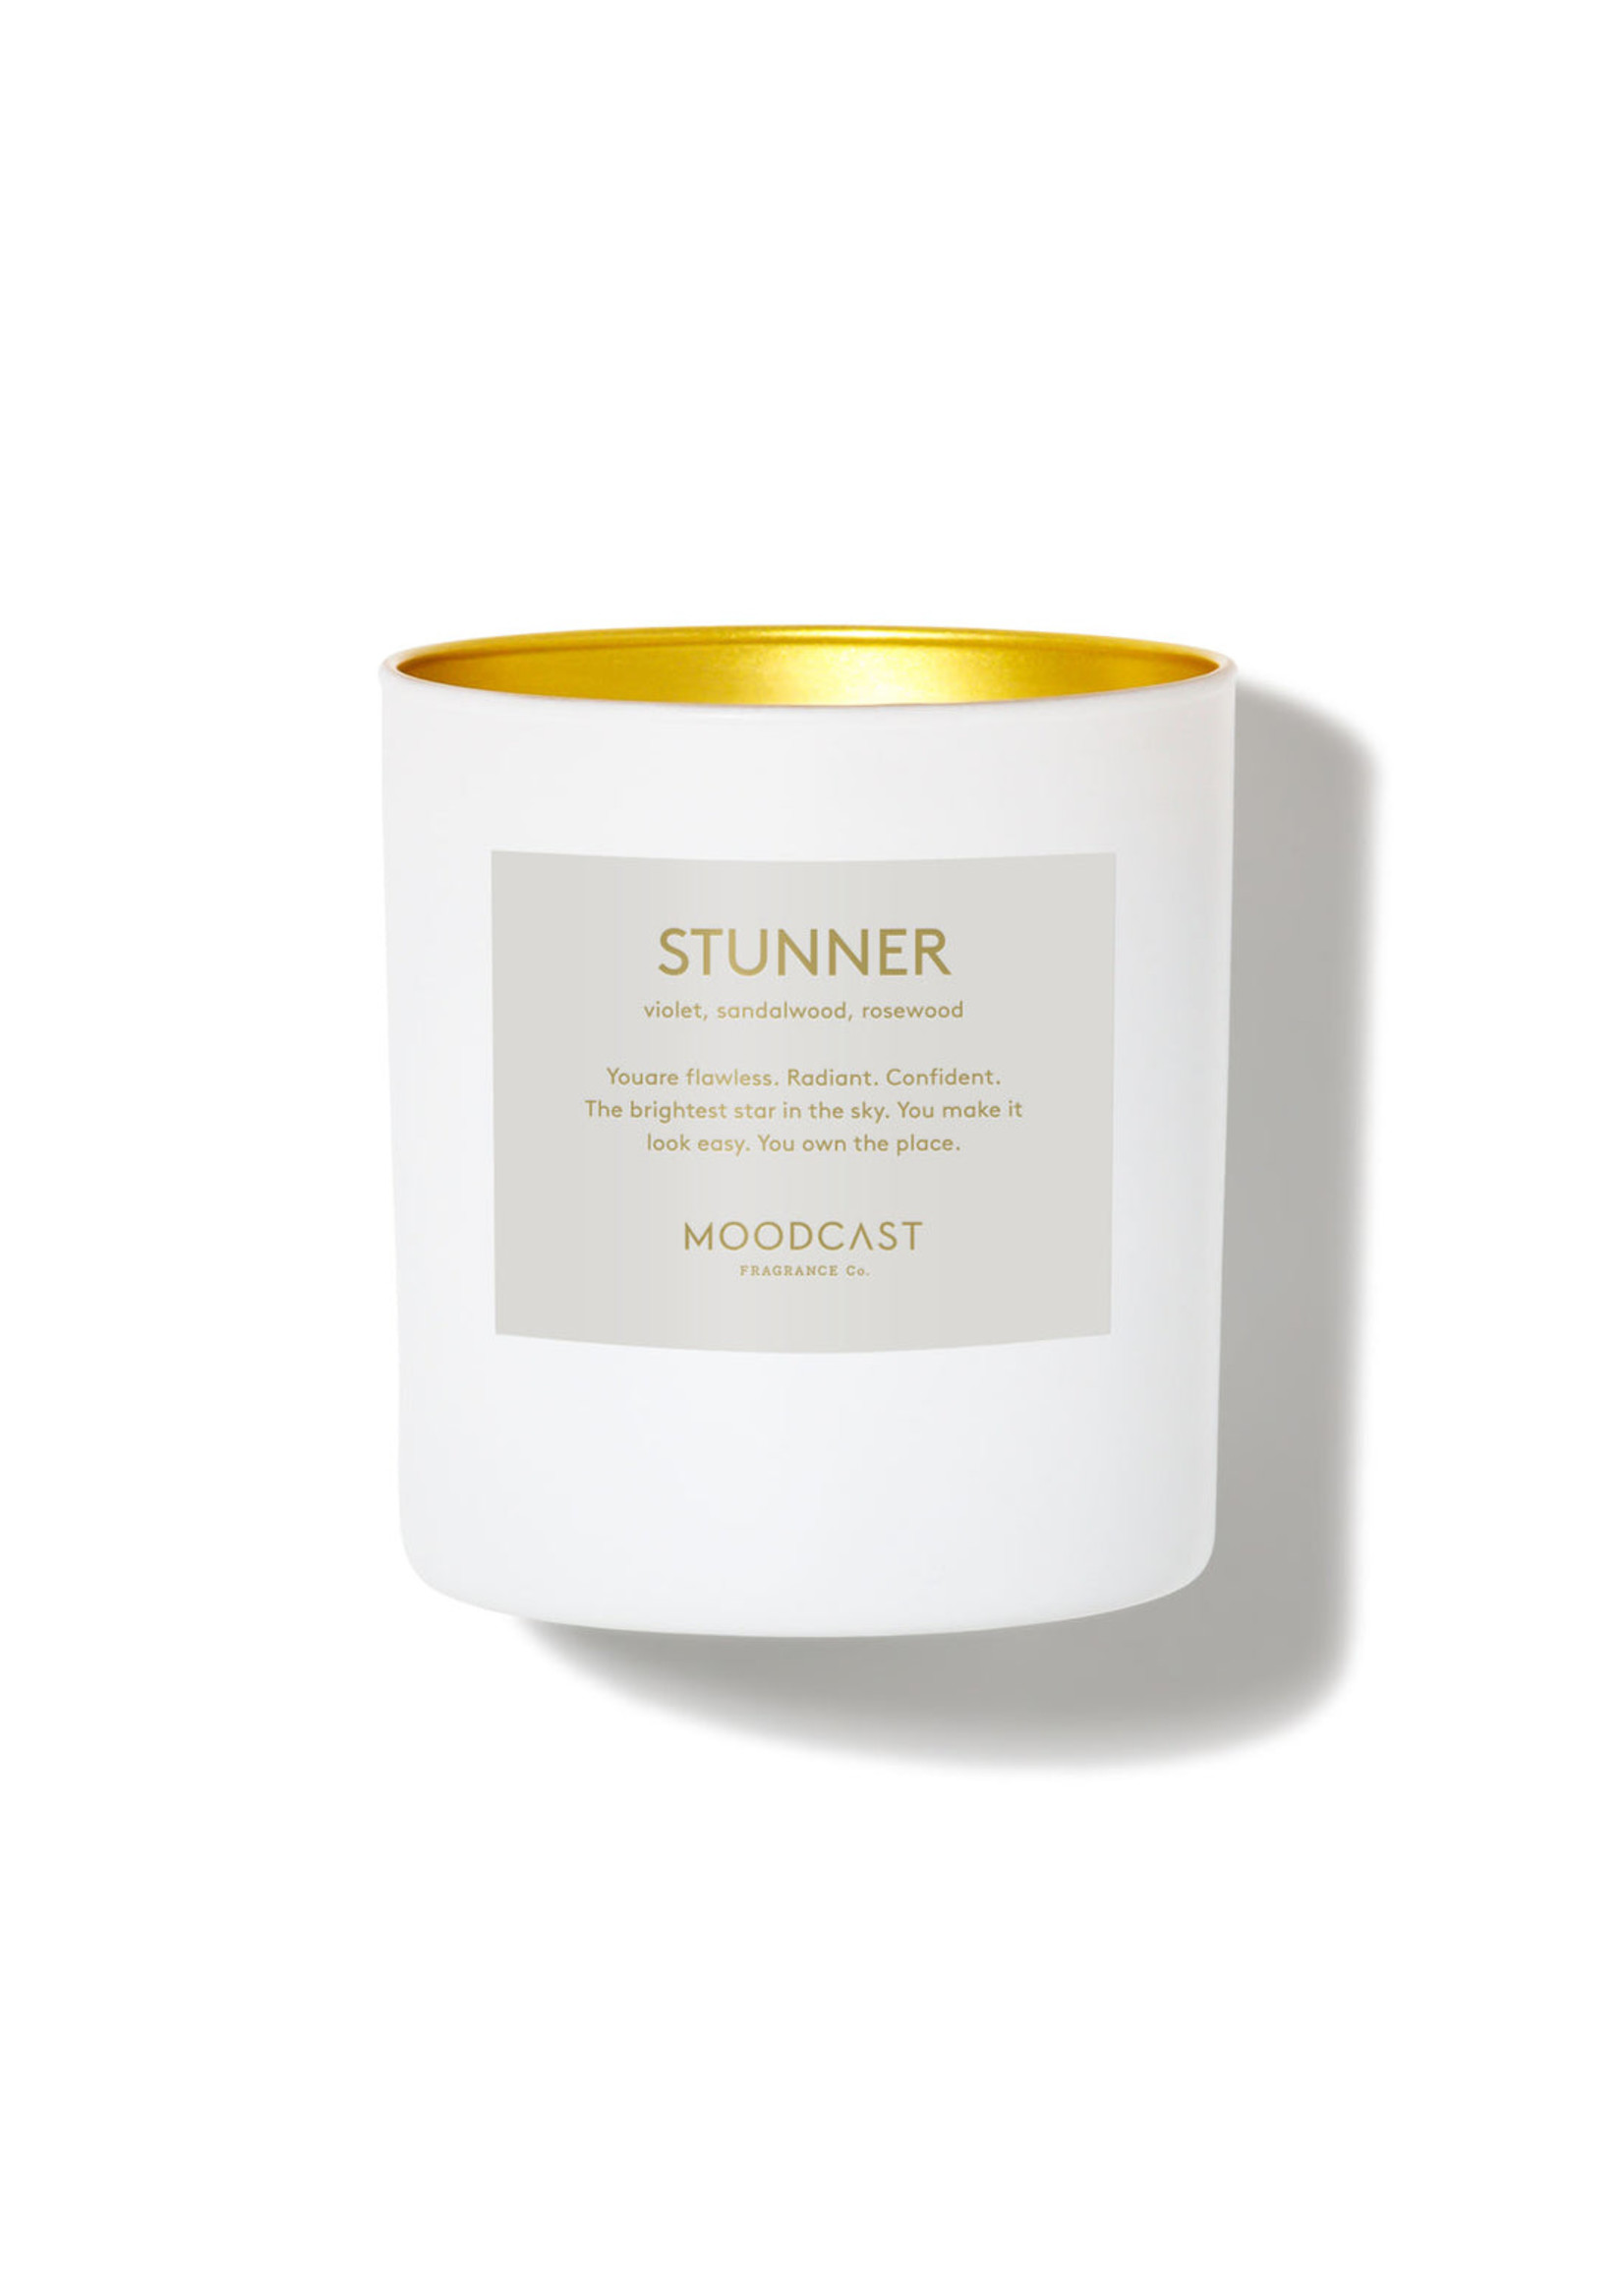 Moodcast Fragrance Co. Moodcast Stunner Candle